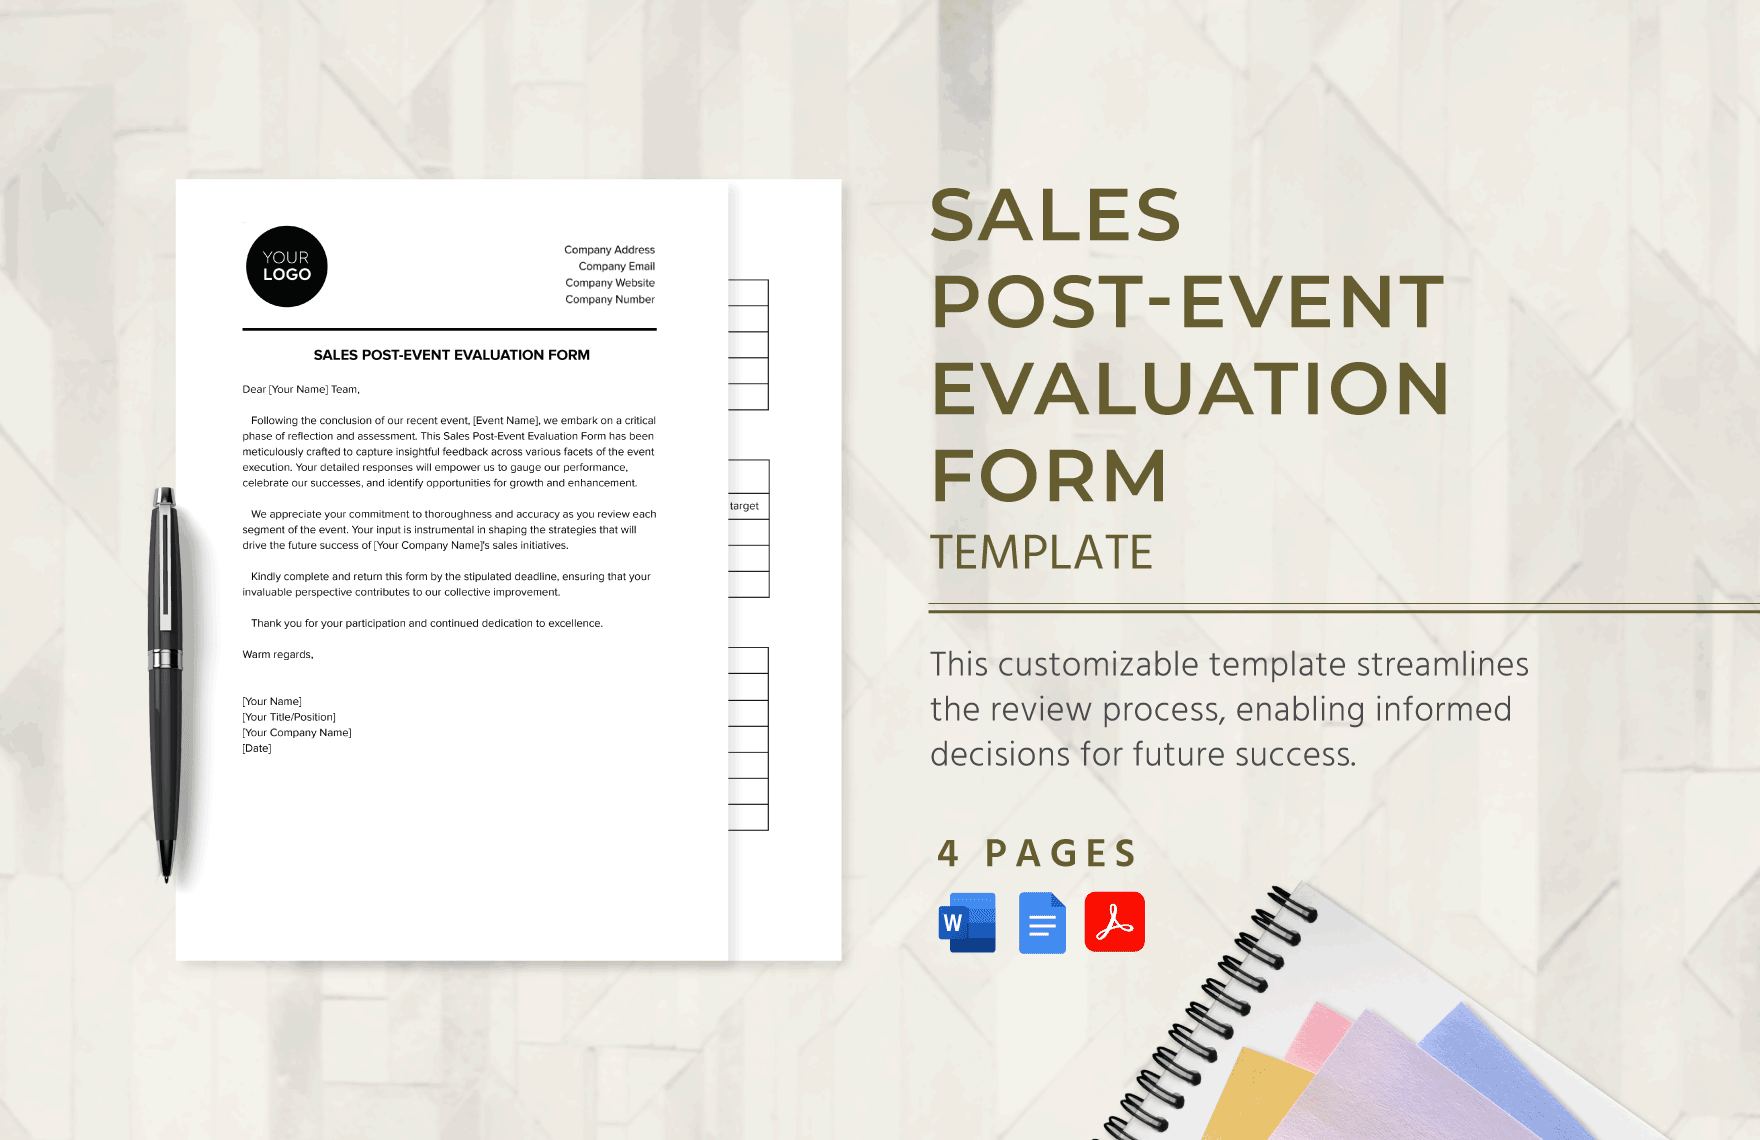 Sales Post-Event Evaluation Form Template in Word, Google Docs, PDF